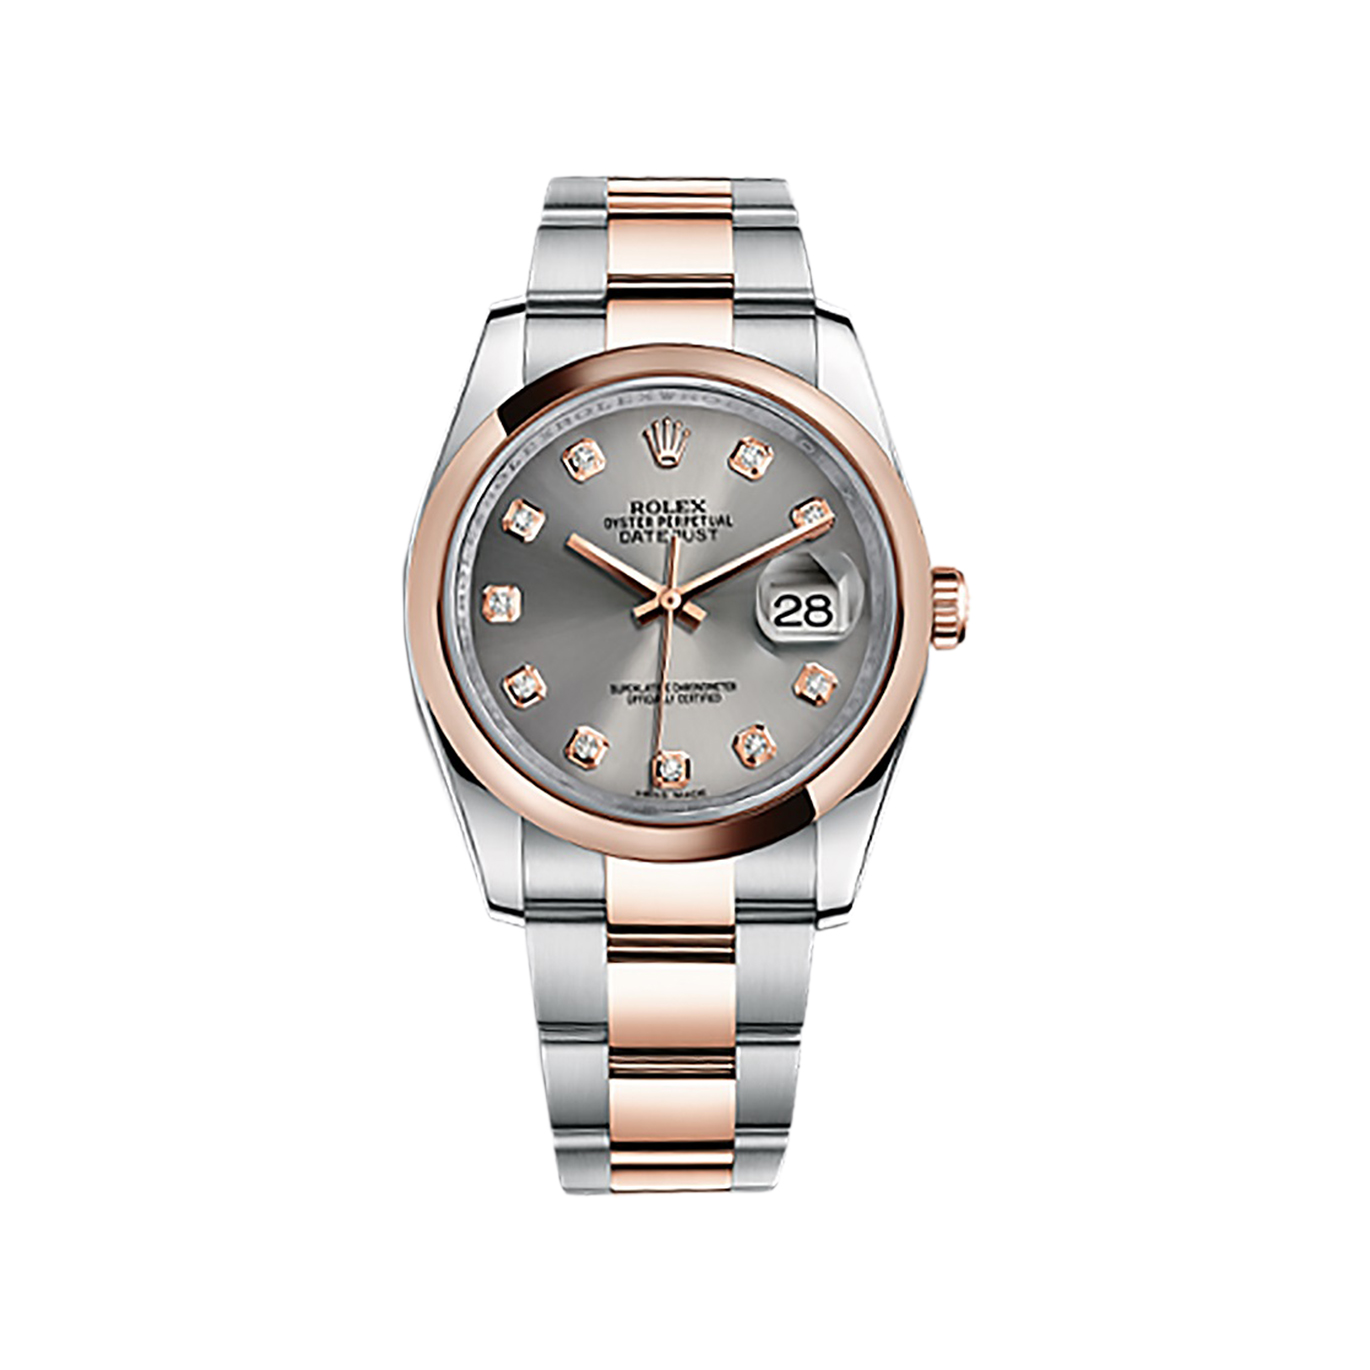 Datejust 36 116201 Rose Gold & Stainless Steel Watch (Steel Set with Diamonds) - Click Image to Close